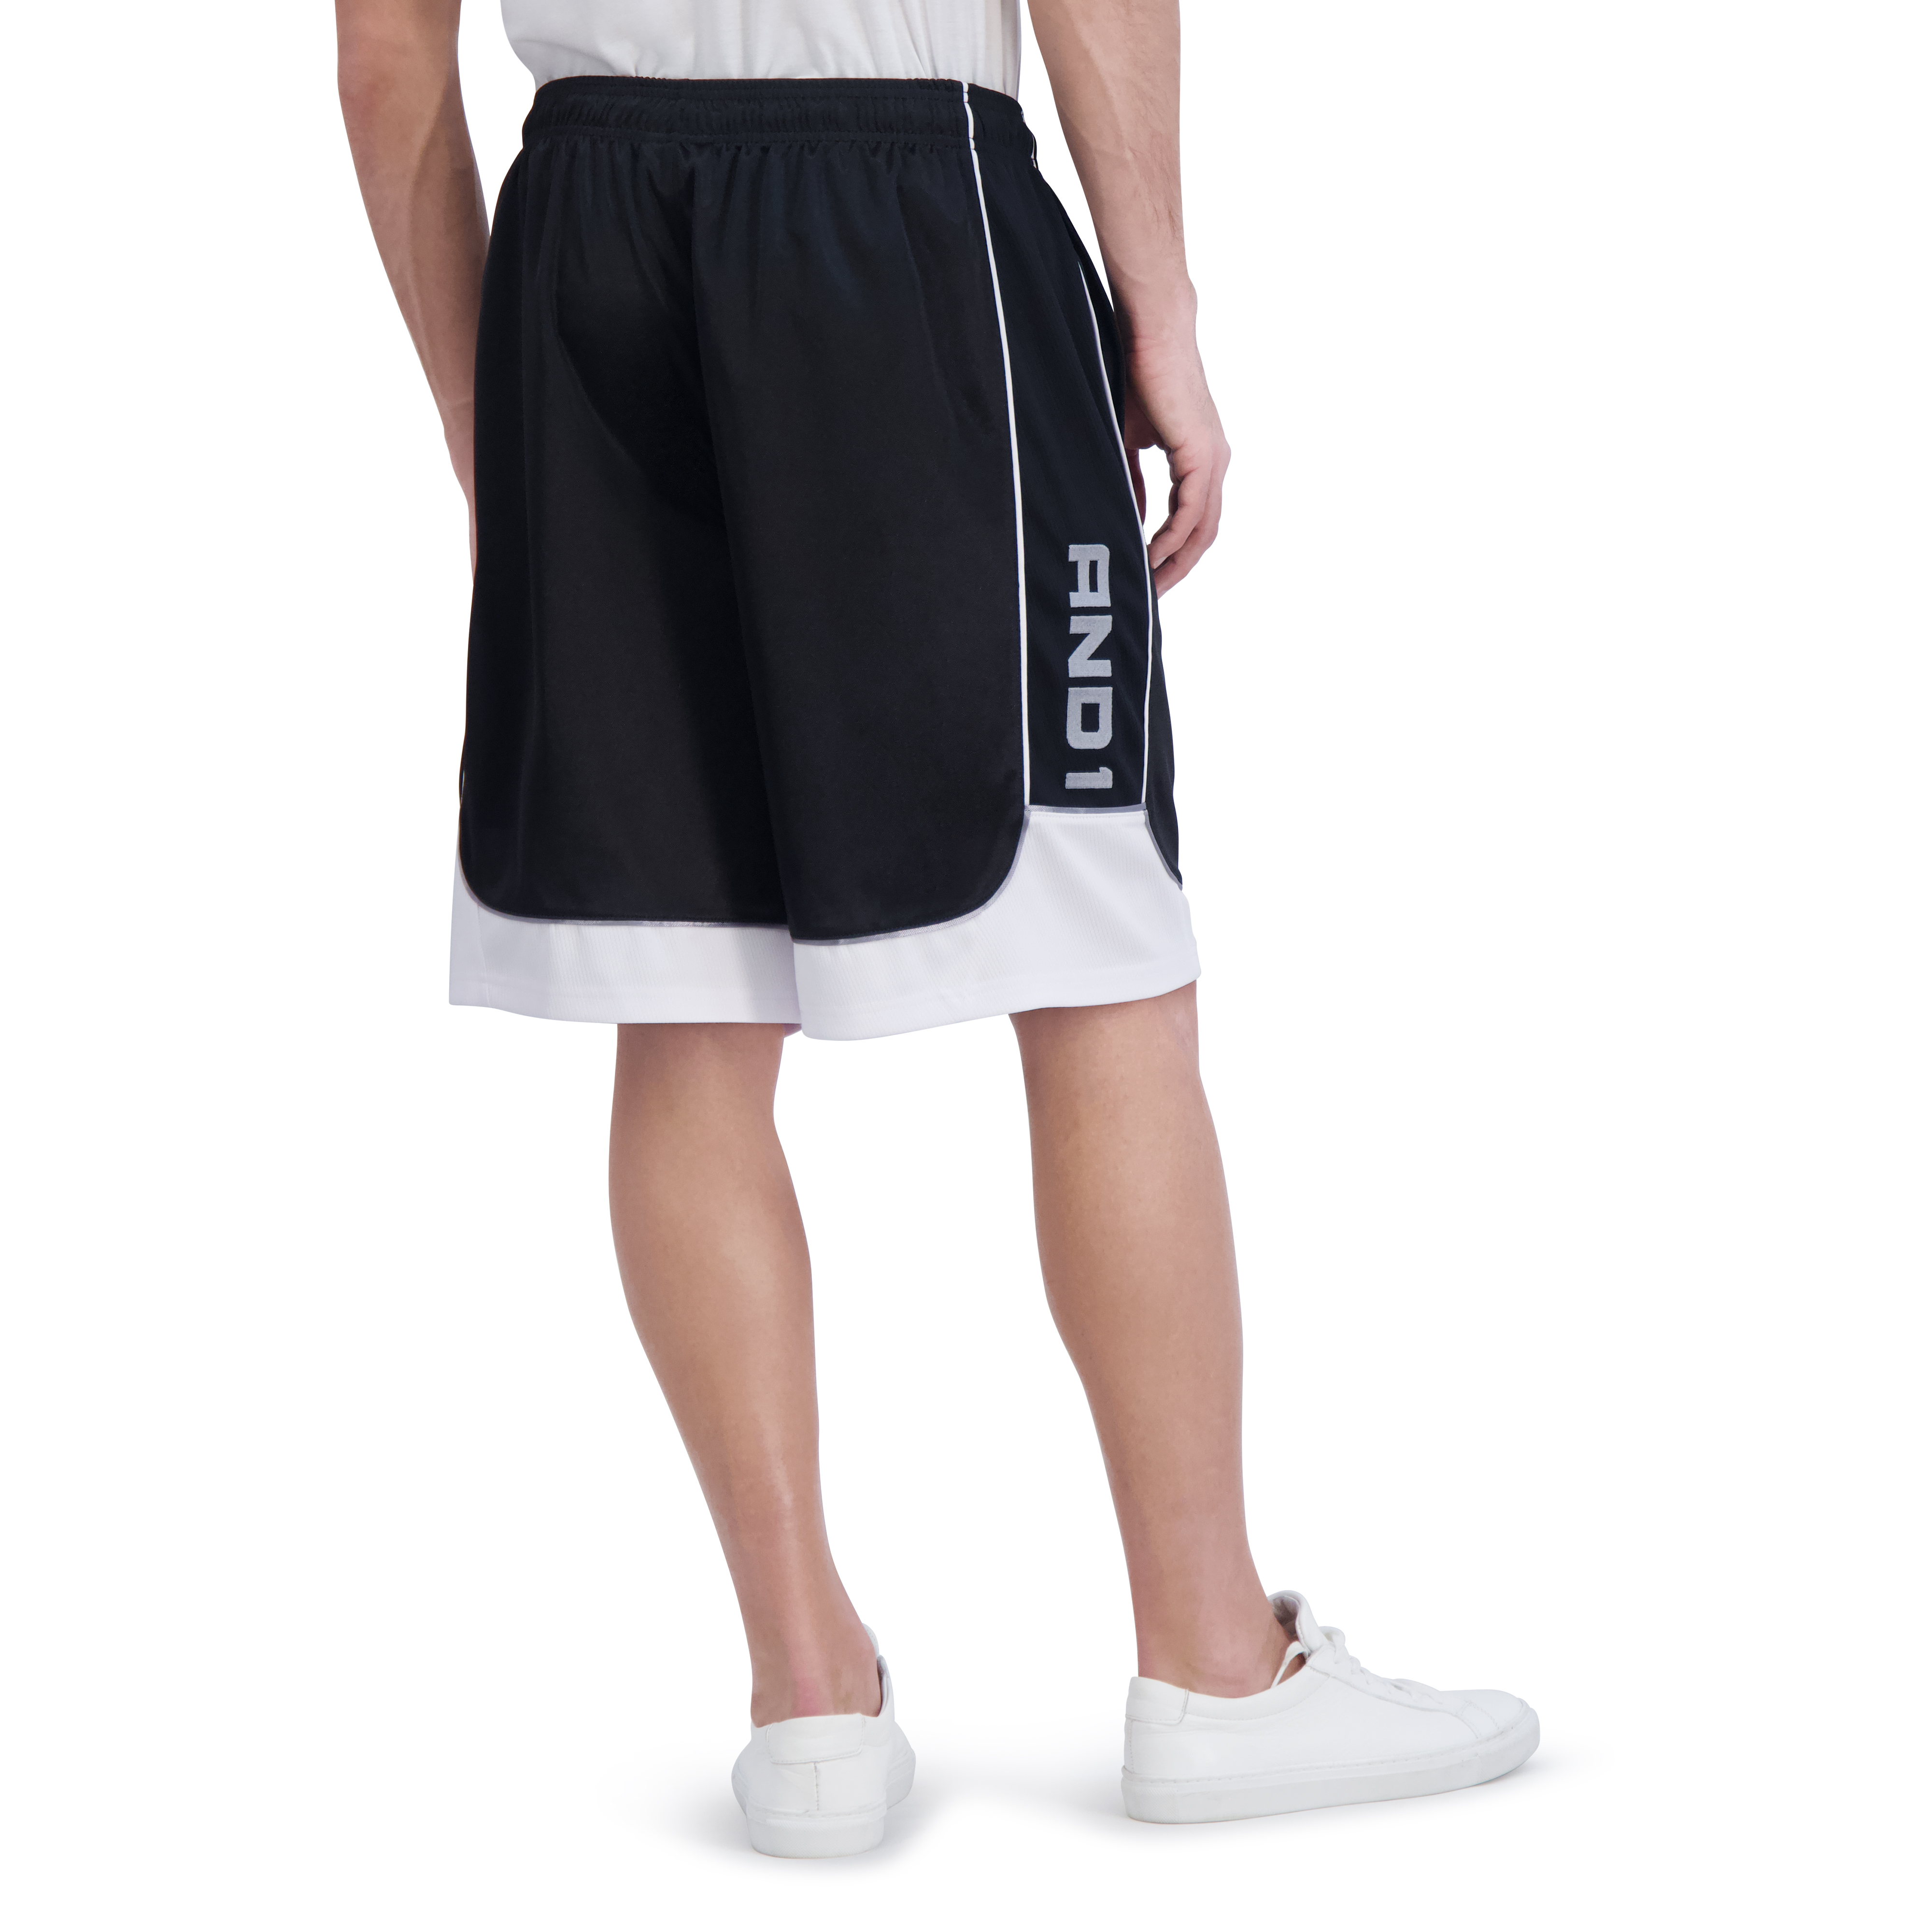 AND1 Men and Big Men's All Court Colorblock 11" Shorts, up to Size 3XL - image 4 of 6